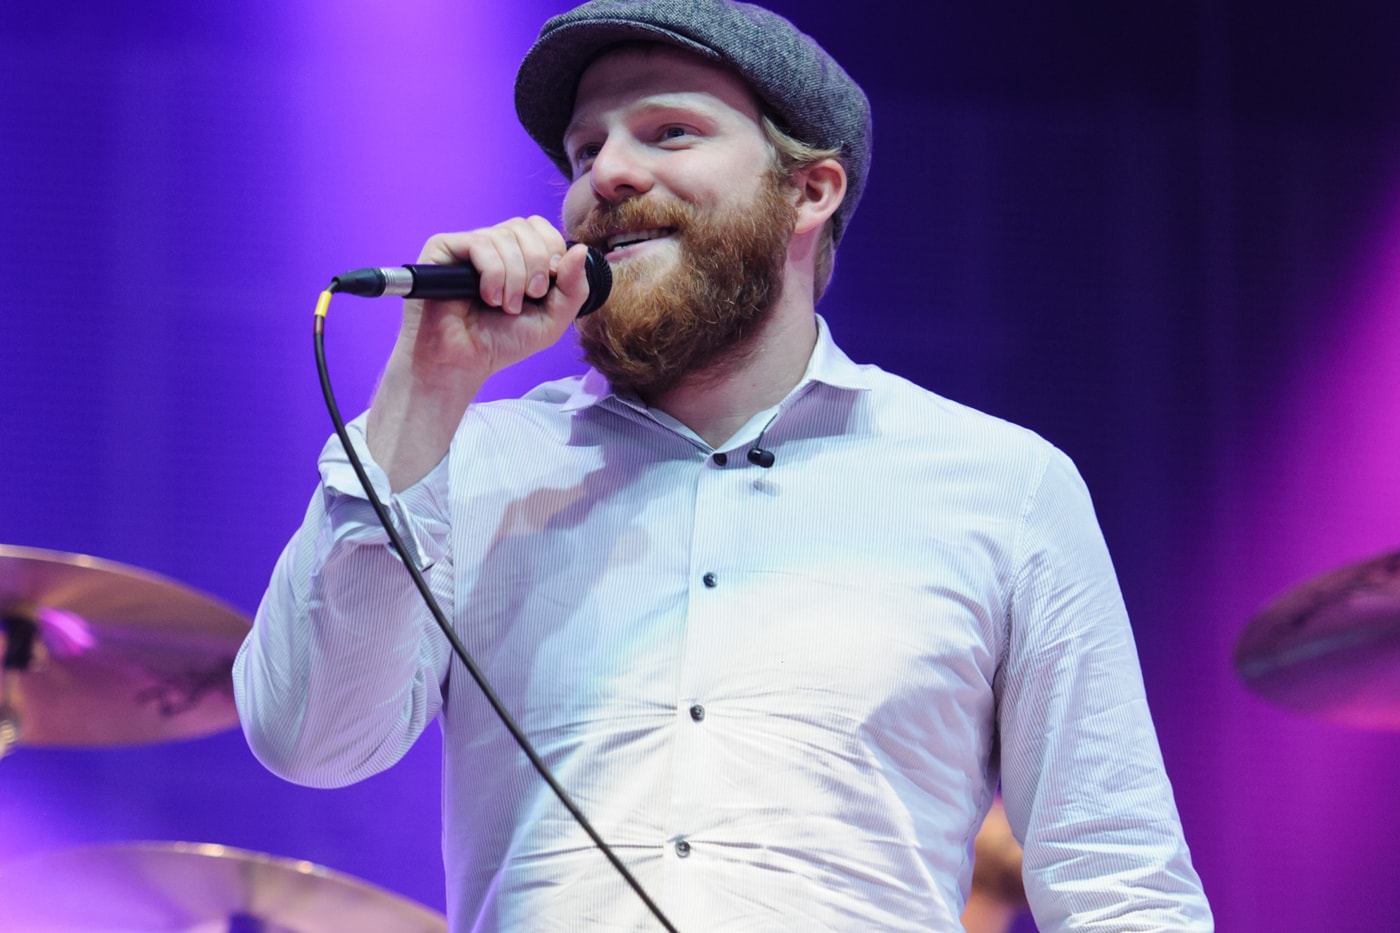 alex-clare-up-all-night-produced-by-diplo-switch